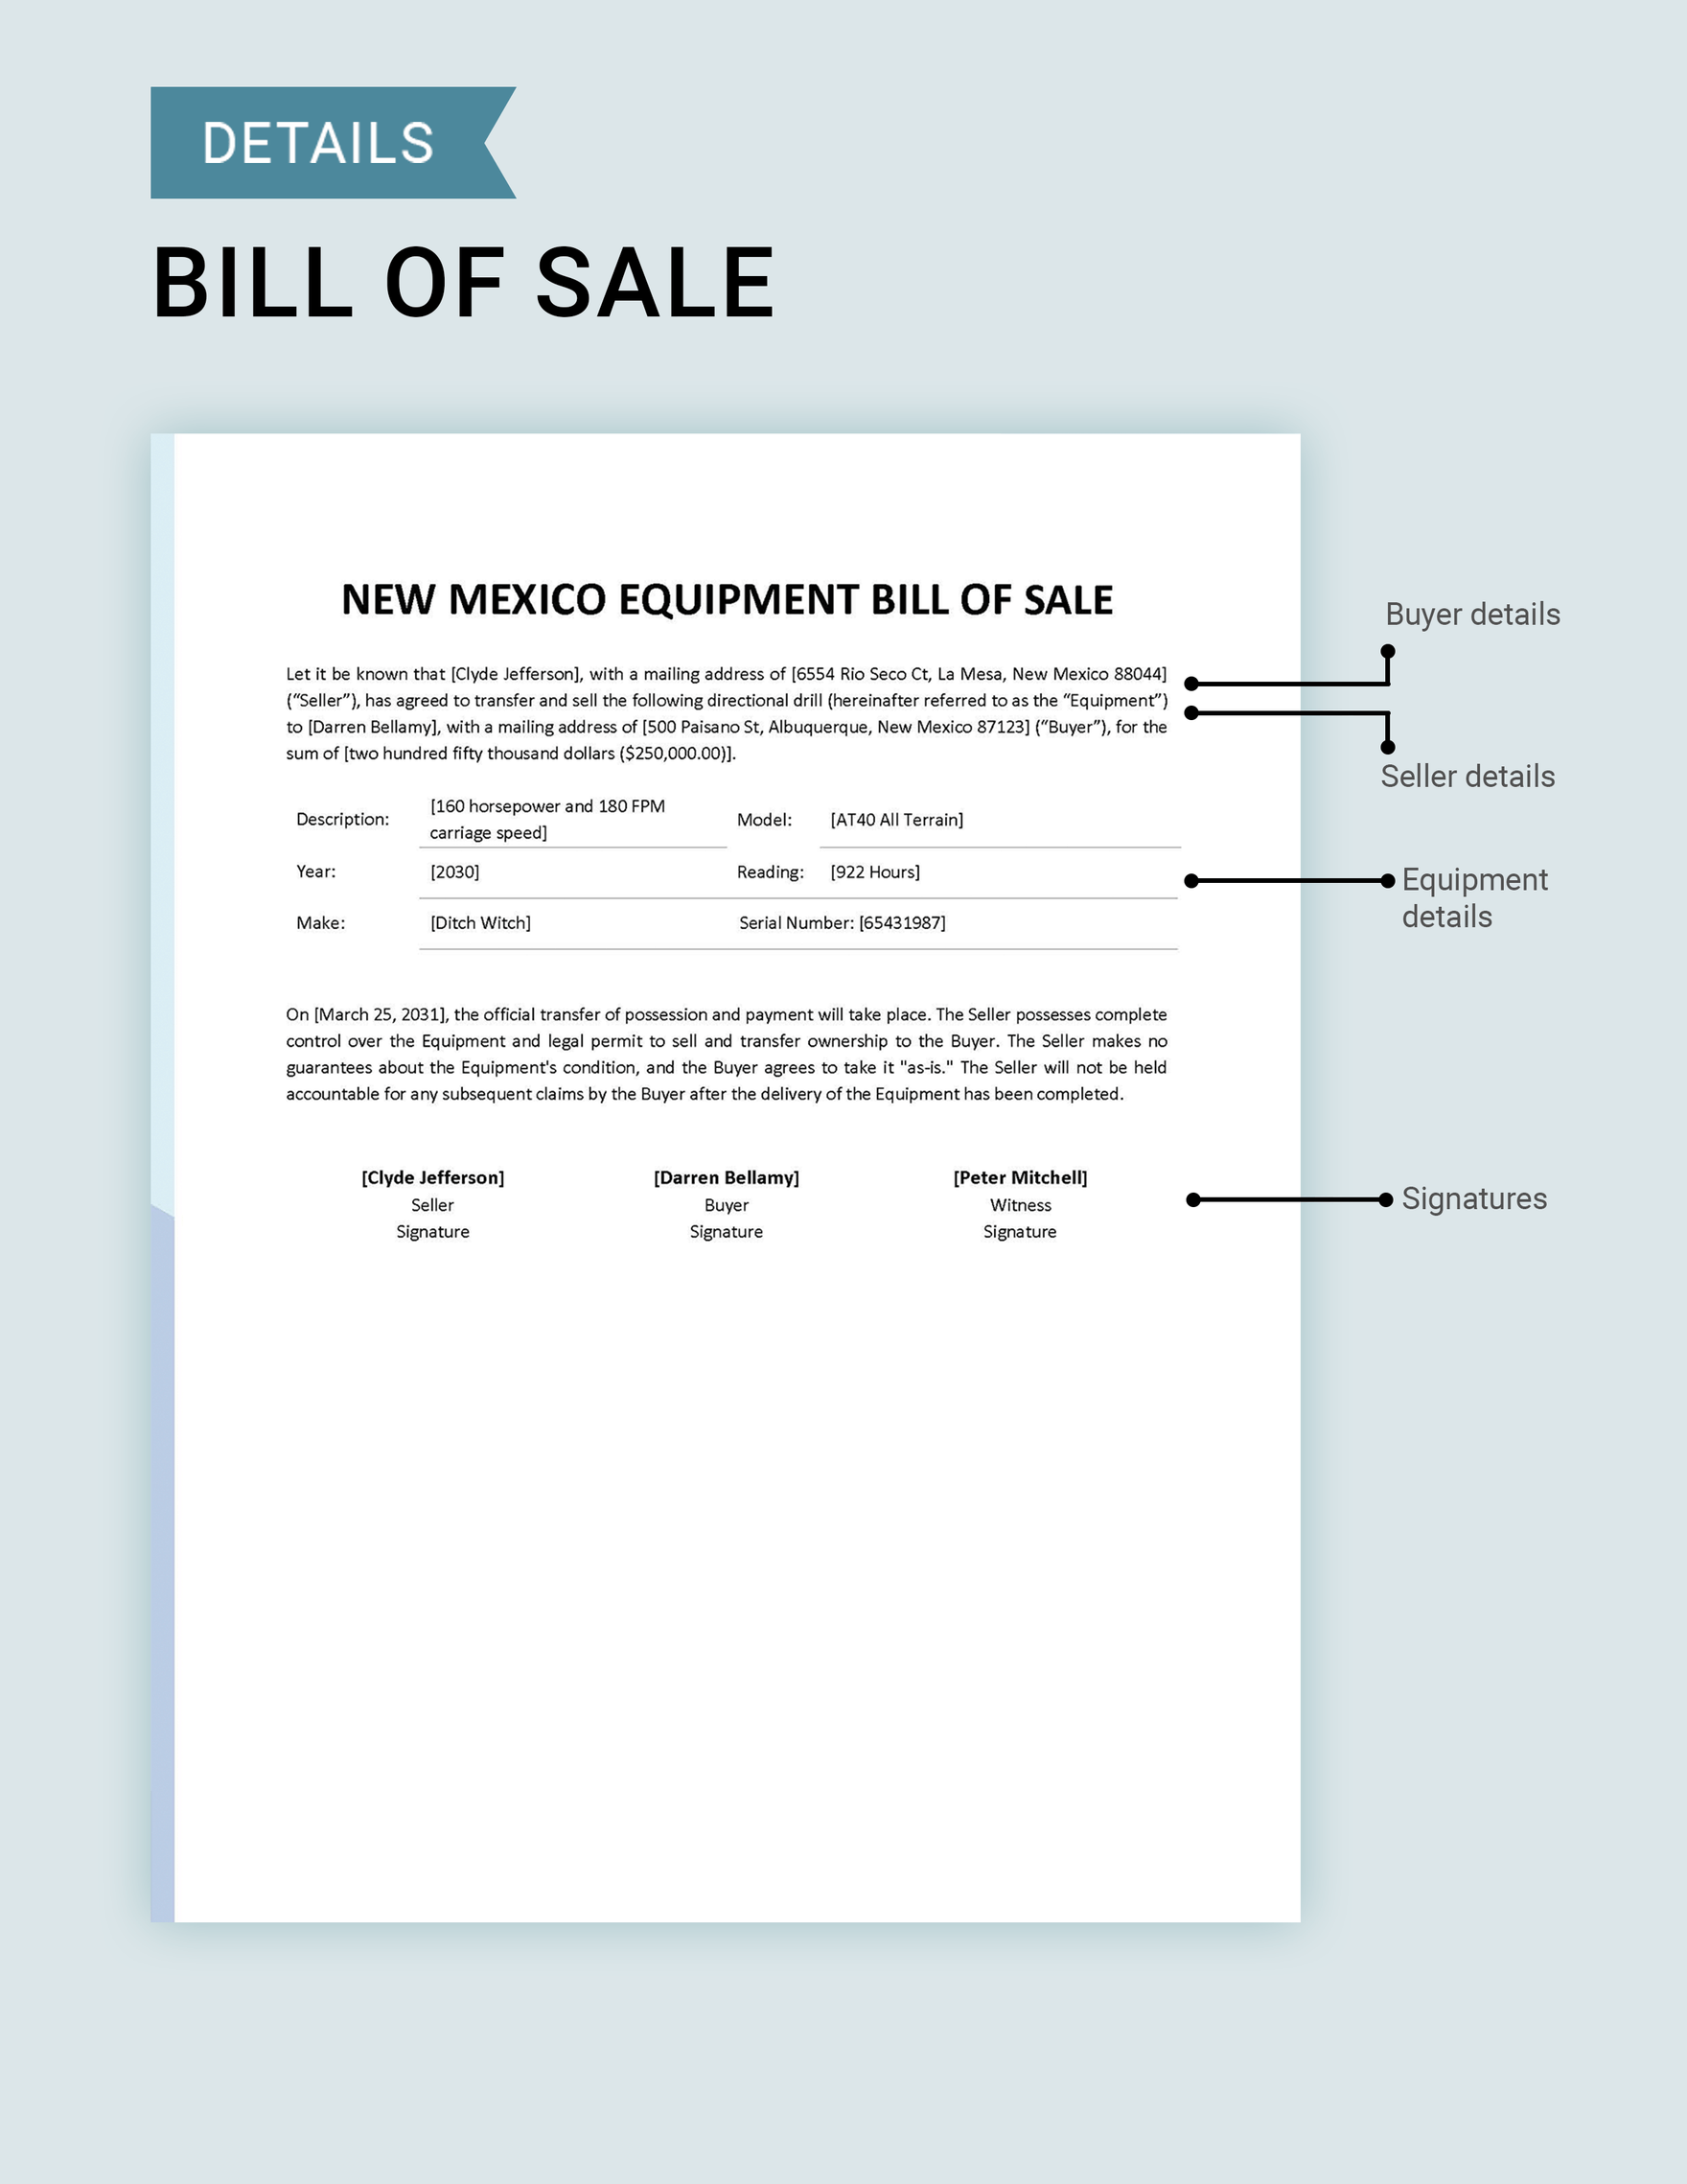 New Mexico Equipment Bill of Sale Form Template